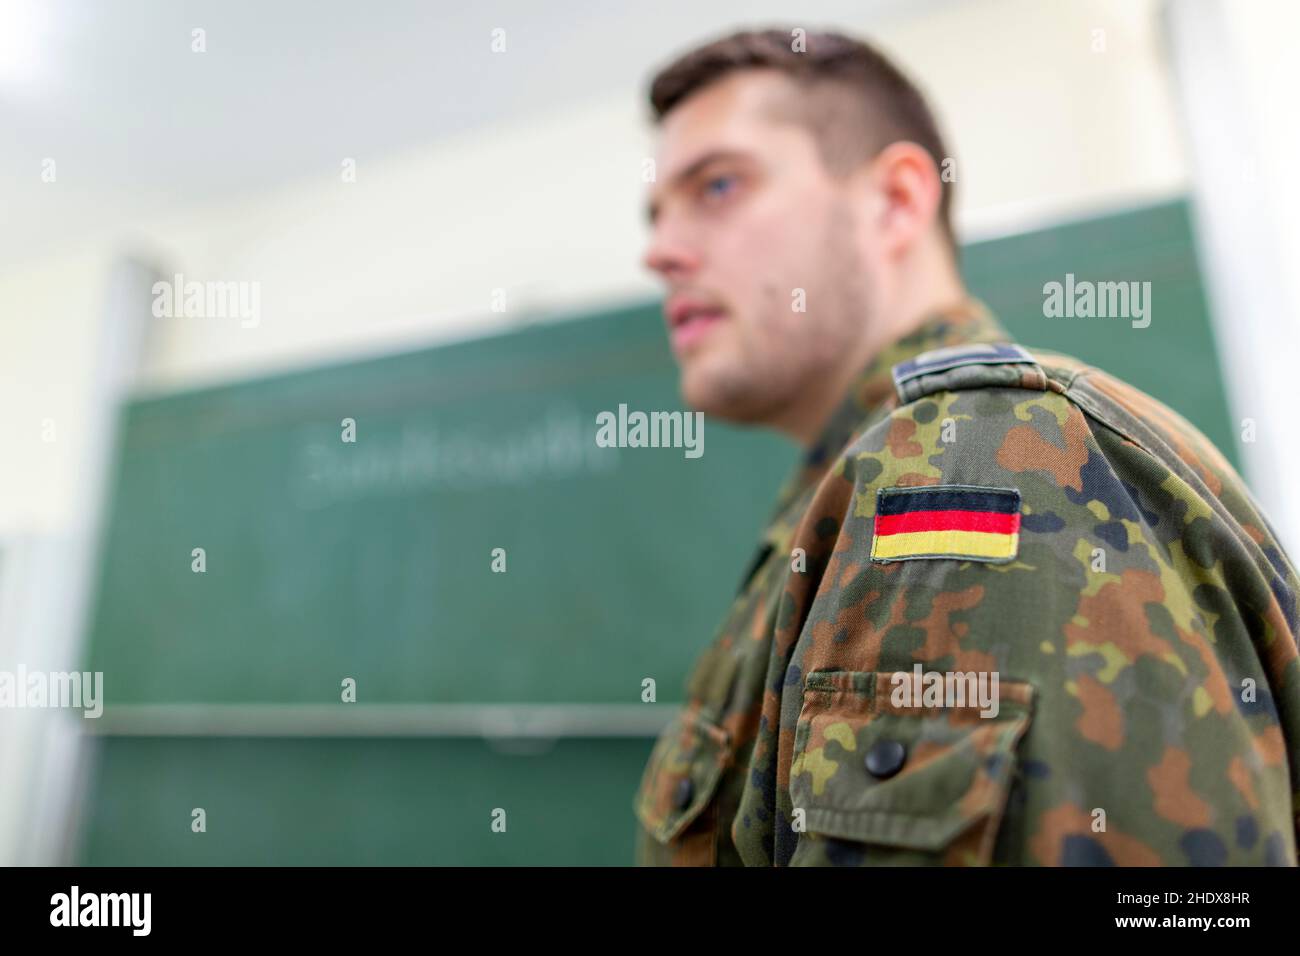 education, army soldier, german military, educations, army soldiers, troops, german militaries Stock Photo